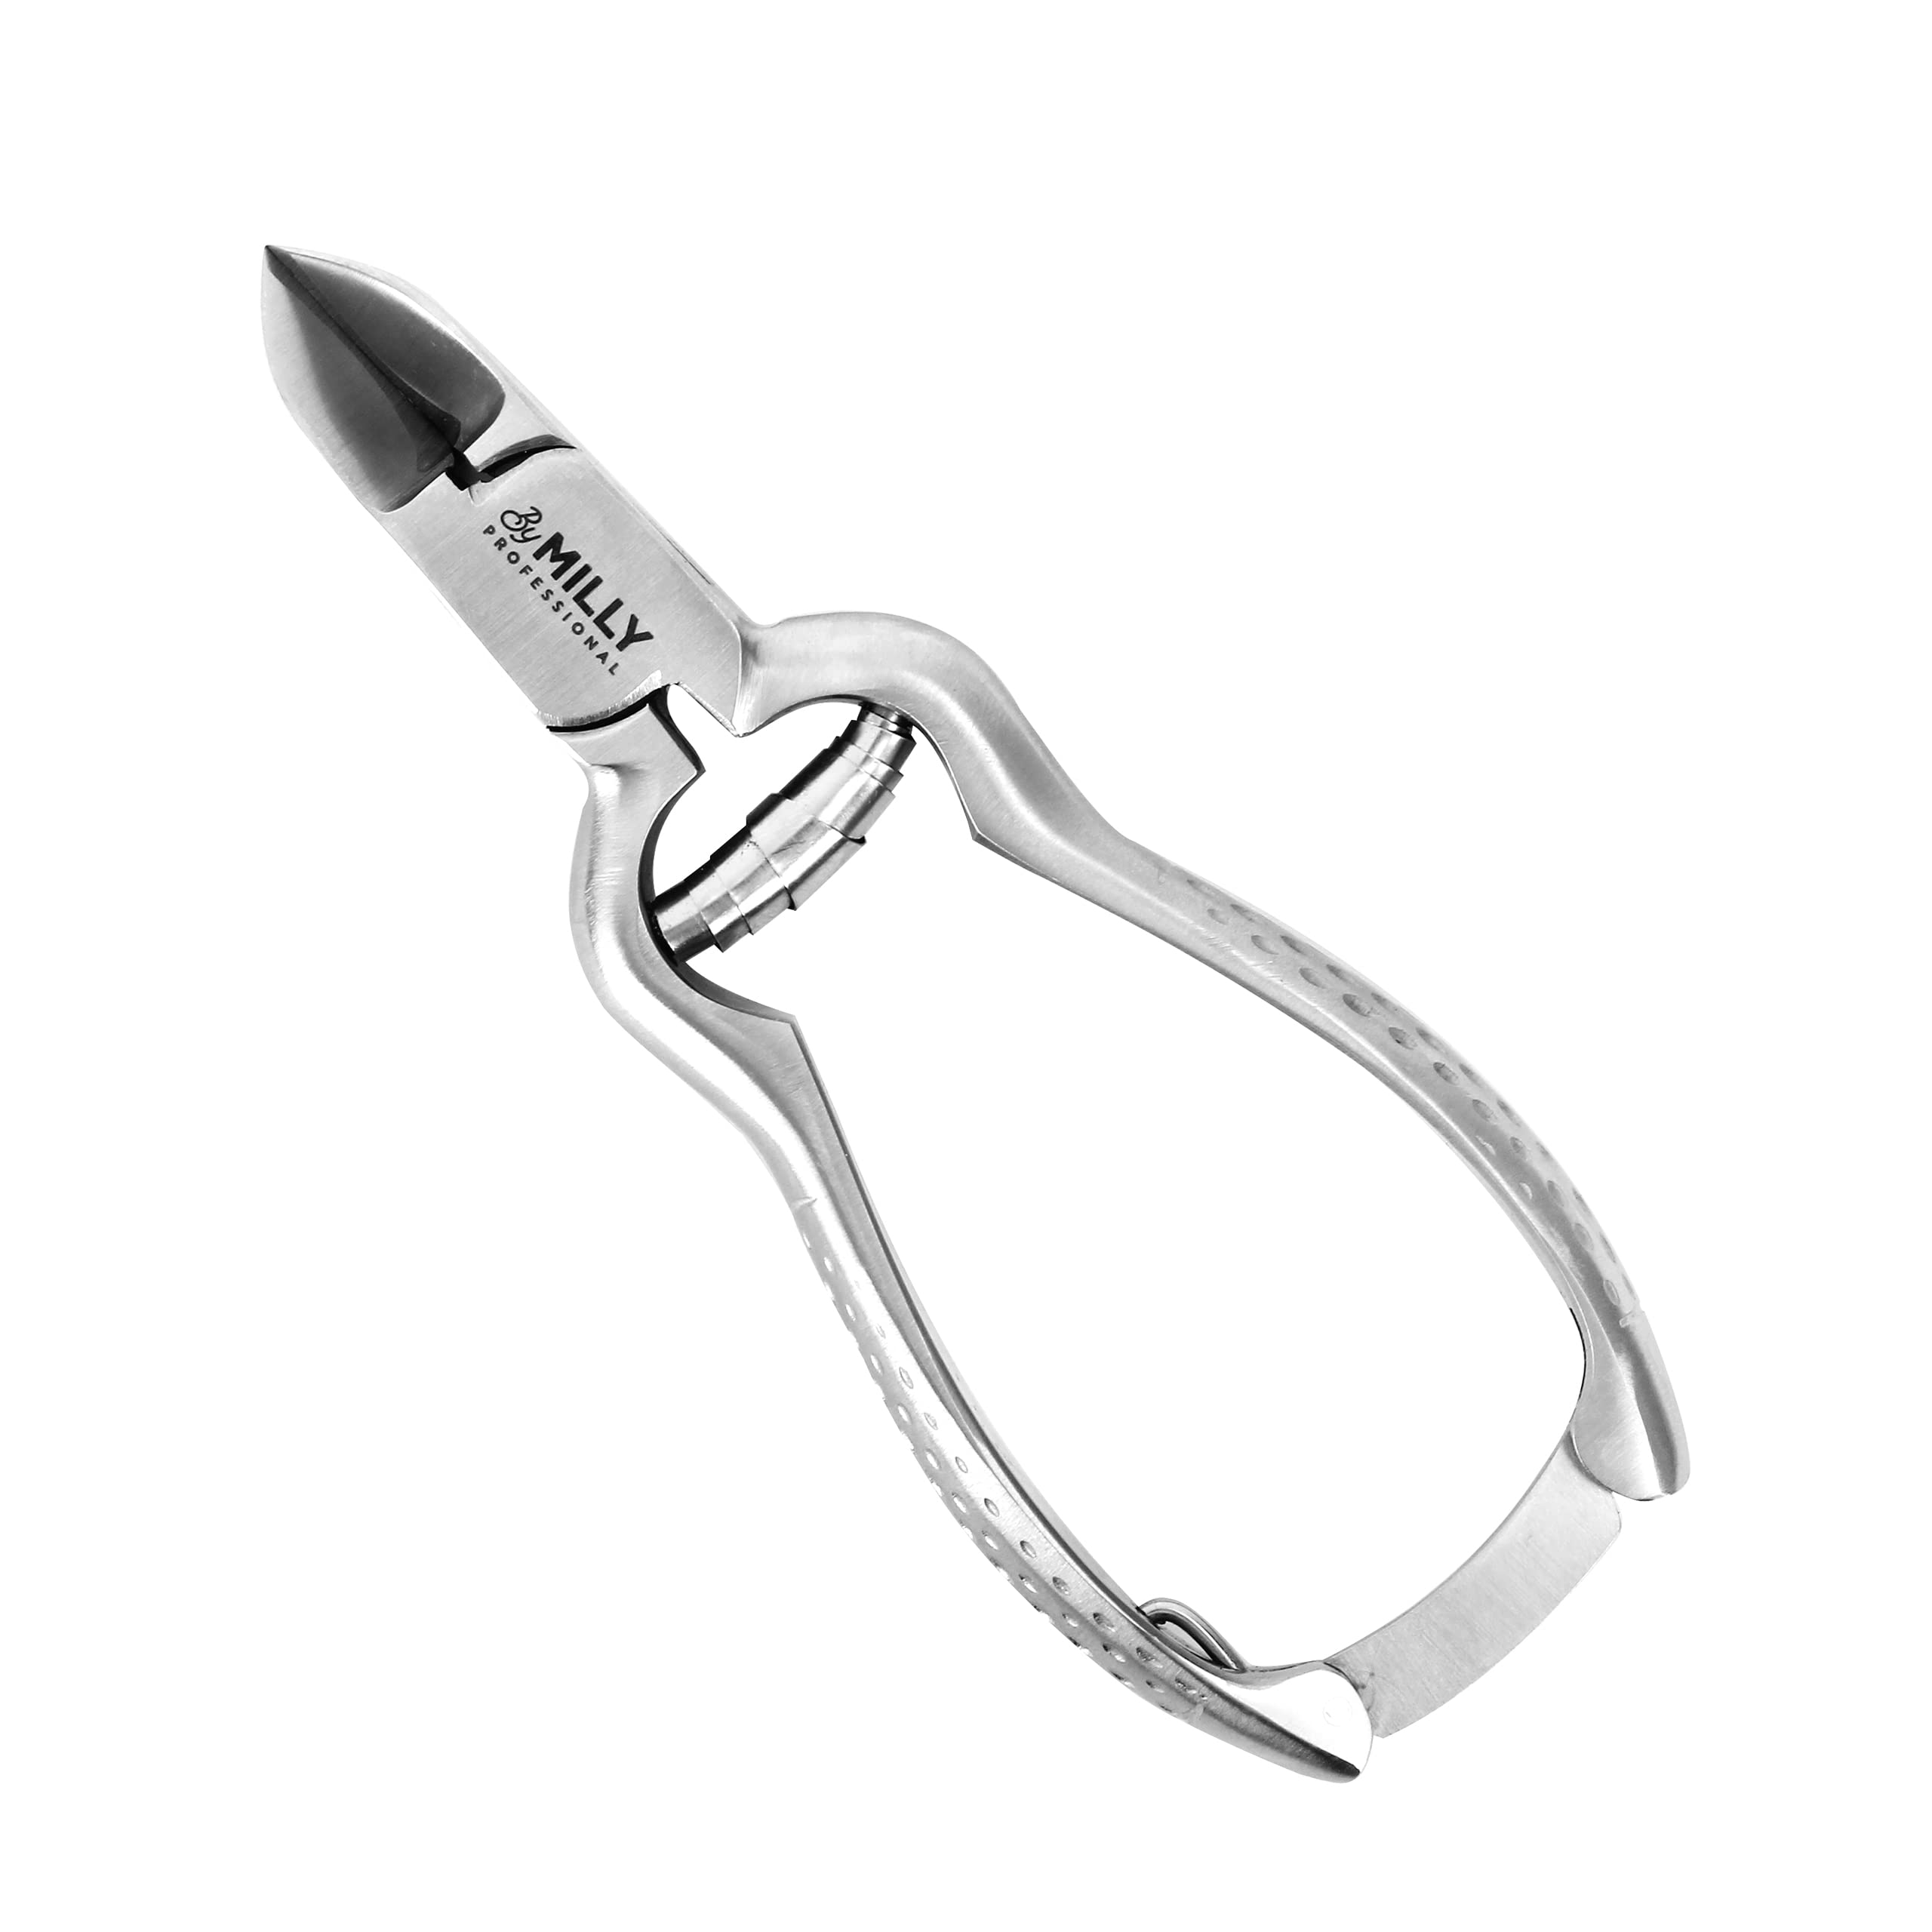 BRAND NEW GERMAN MADE STAINLESS STEEL SMALL NAIL CLIPPER CUTTER FOR  FINGERNAIL